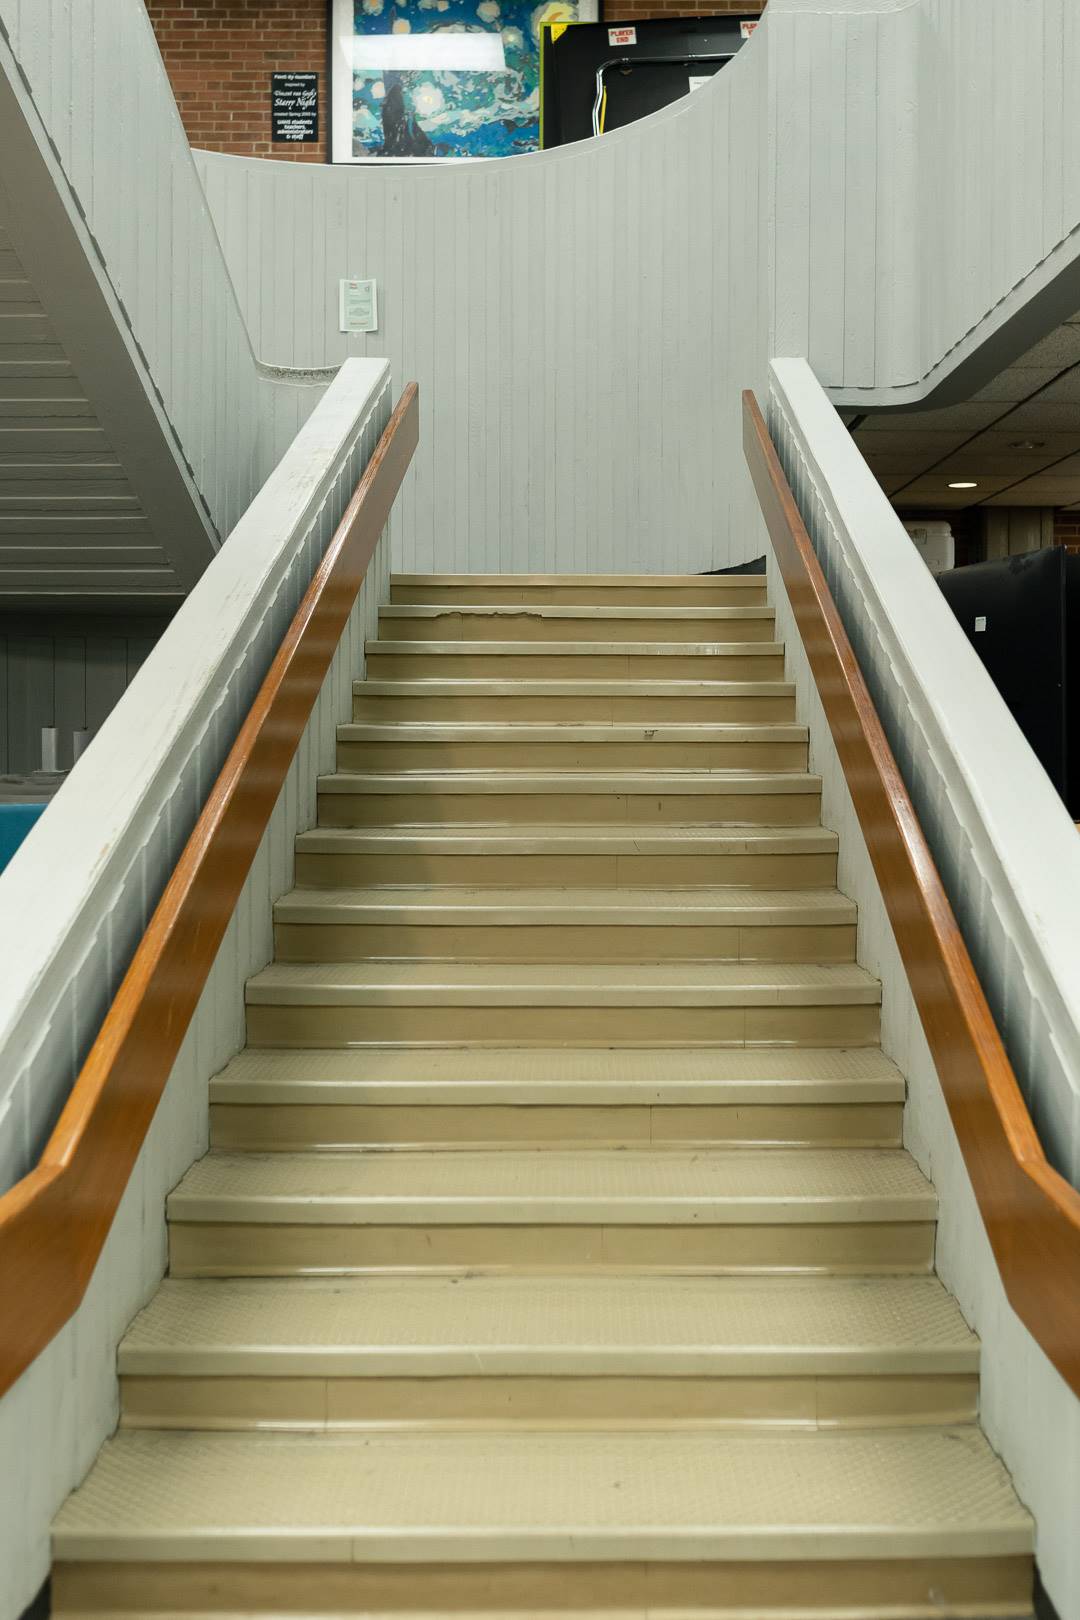 Stairs in the Learning Center